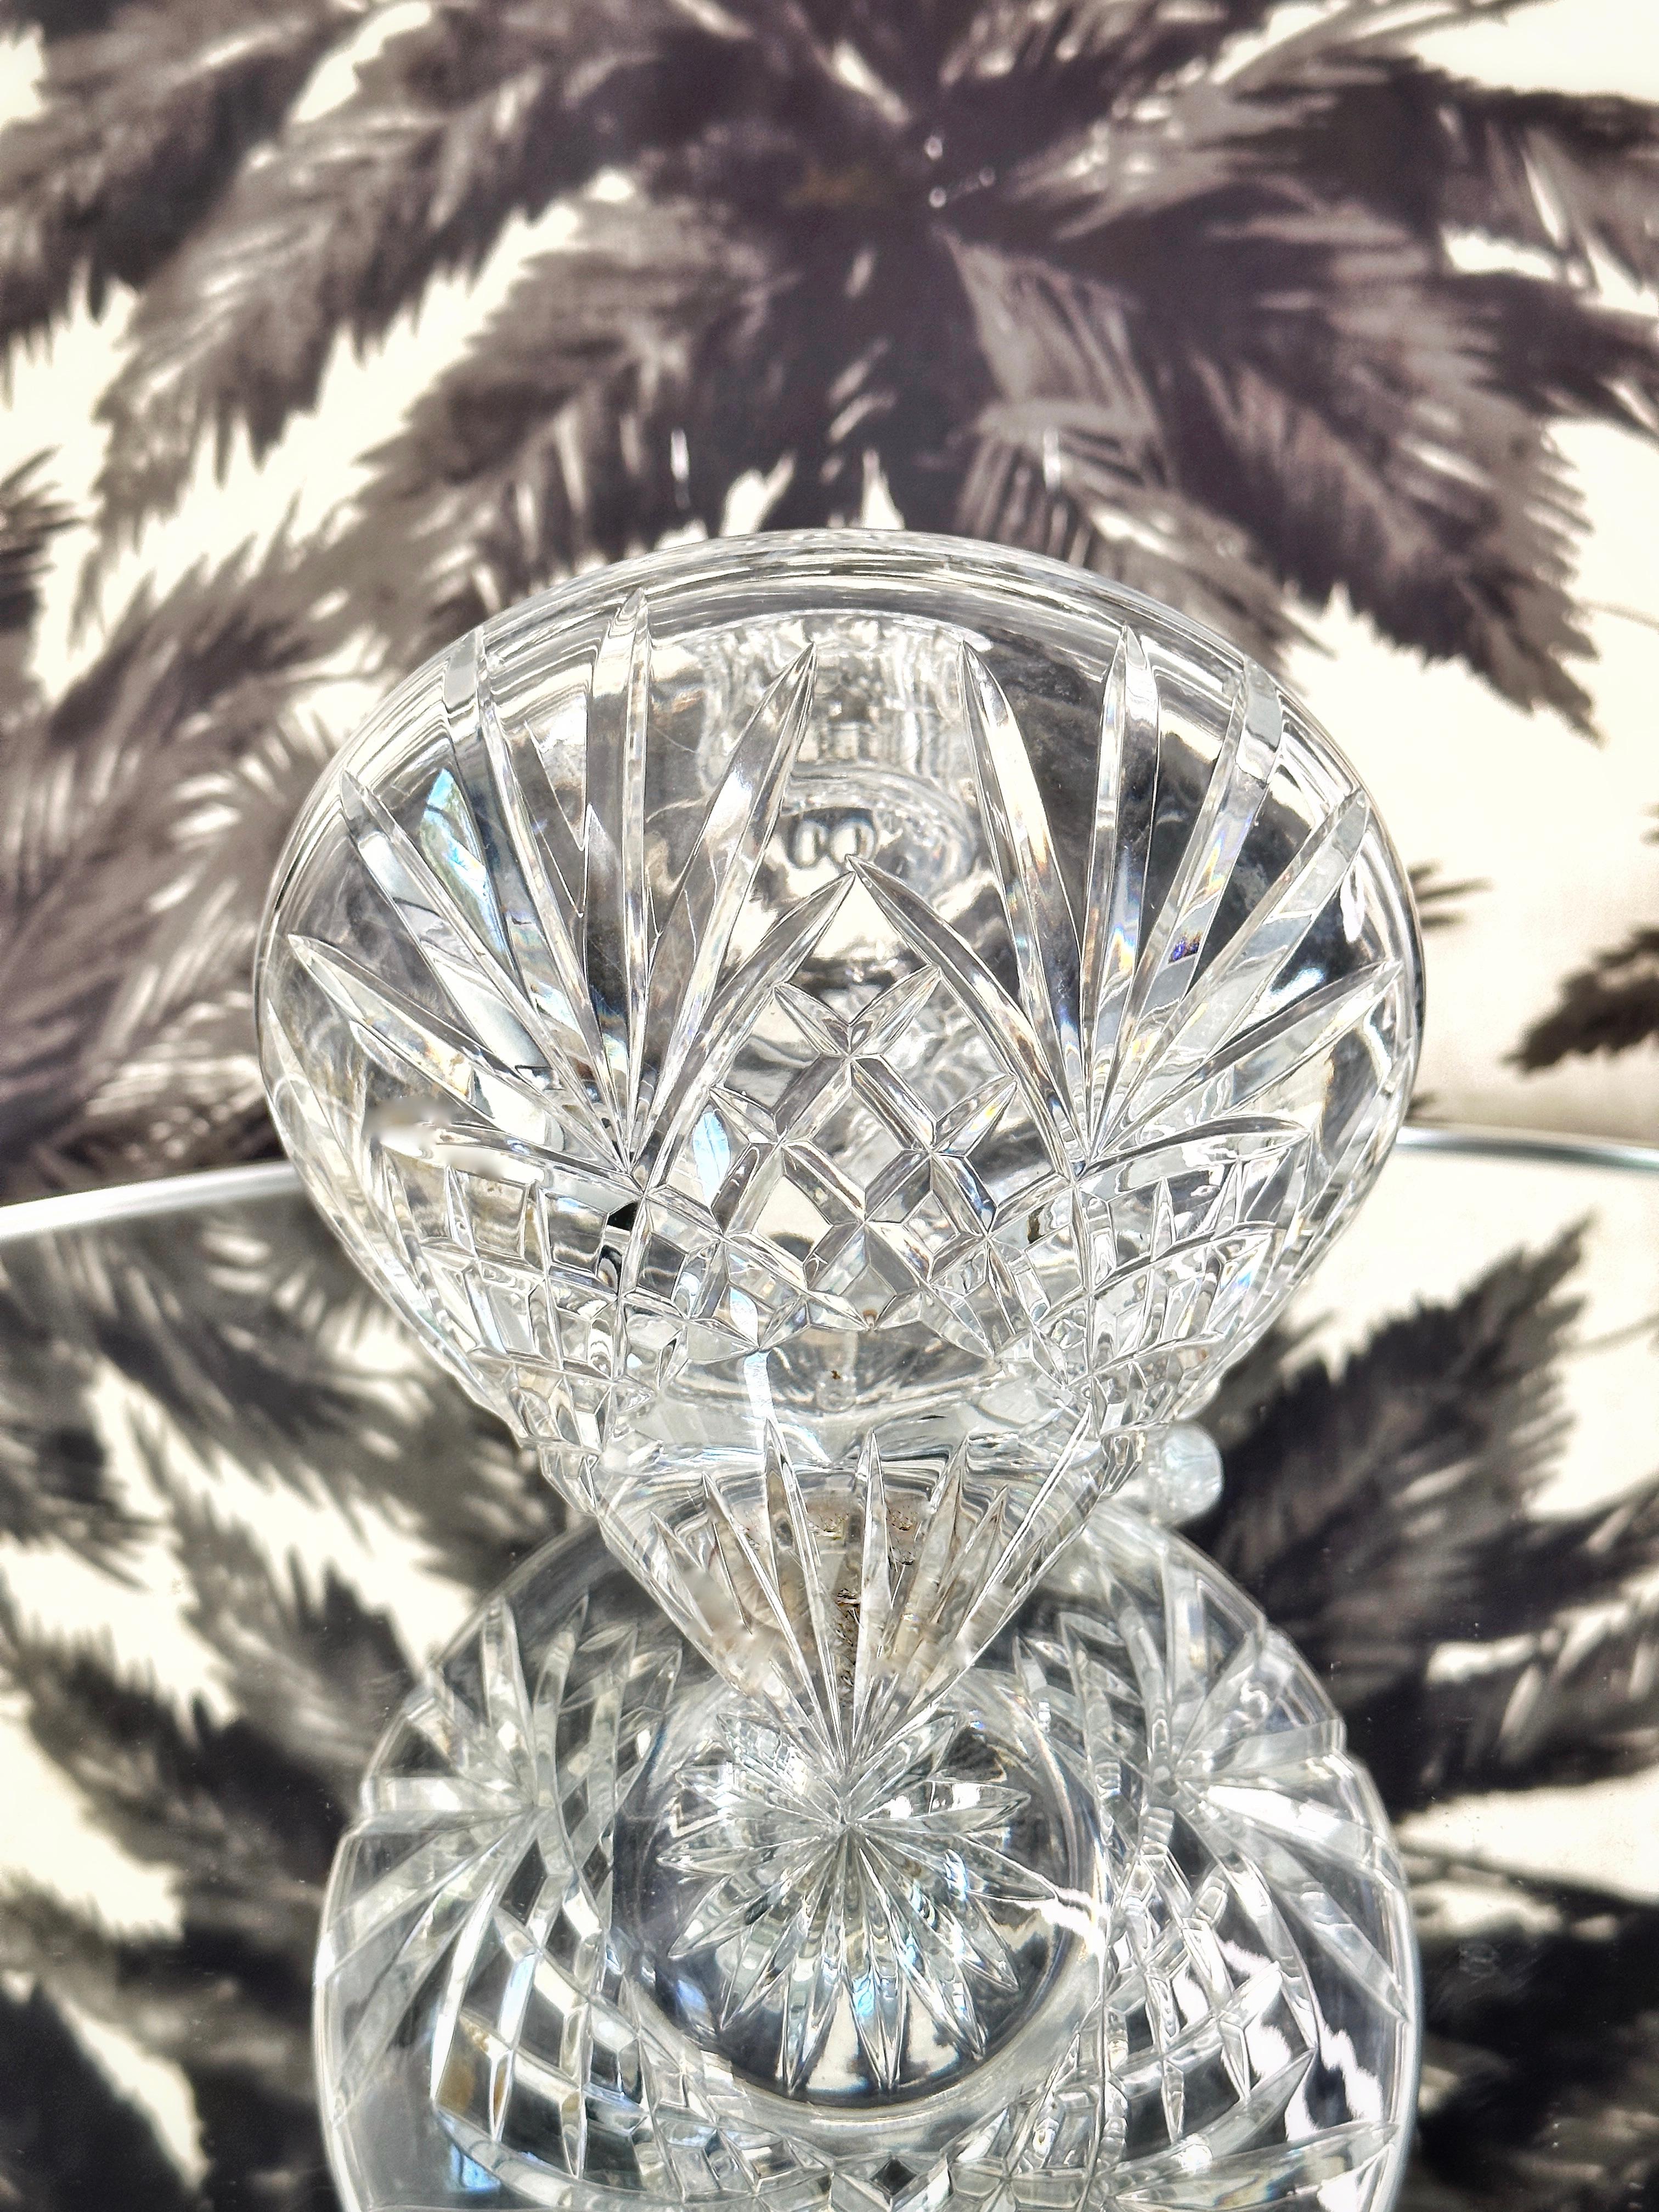 Vintage Waterford Crystal Leaning Decanter with Etched Designs, circa 1980 1